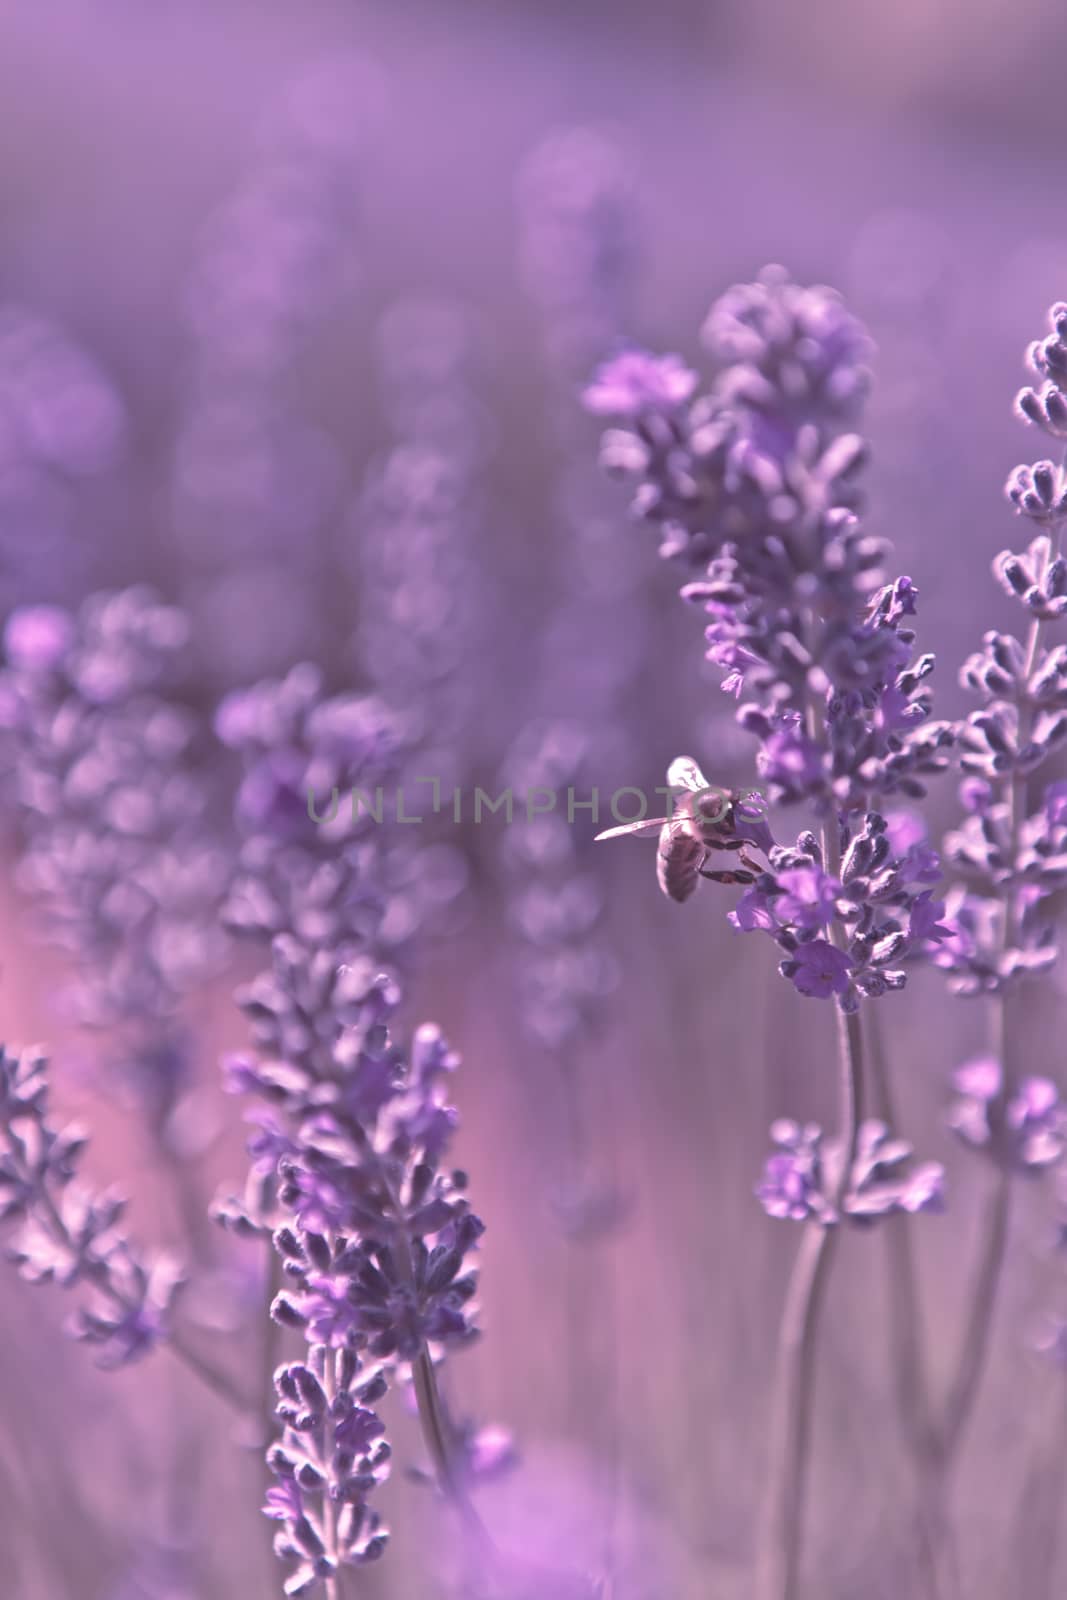 Dreamy purple lavender background with a honey bee alighting on a flower amidst a soft blurry background